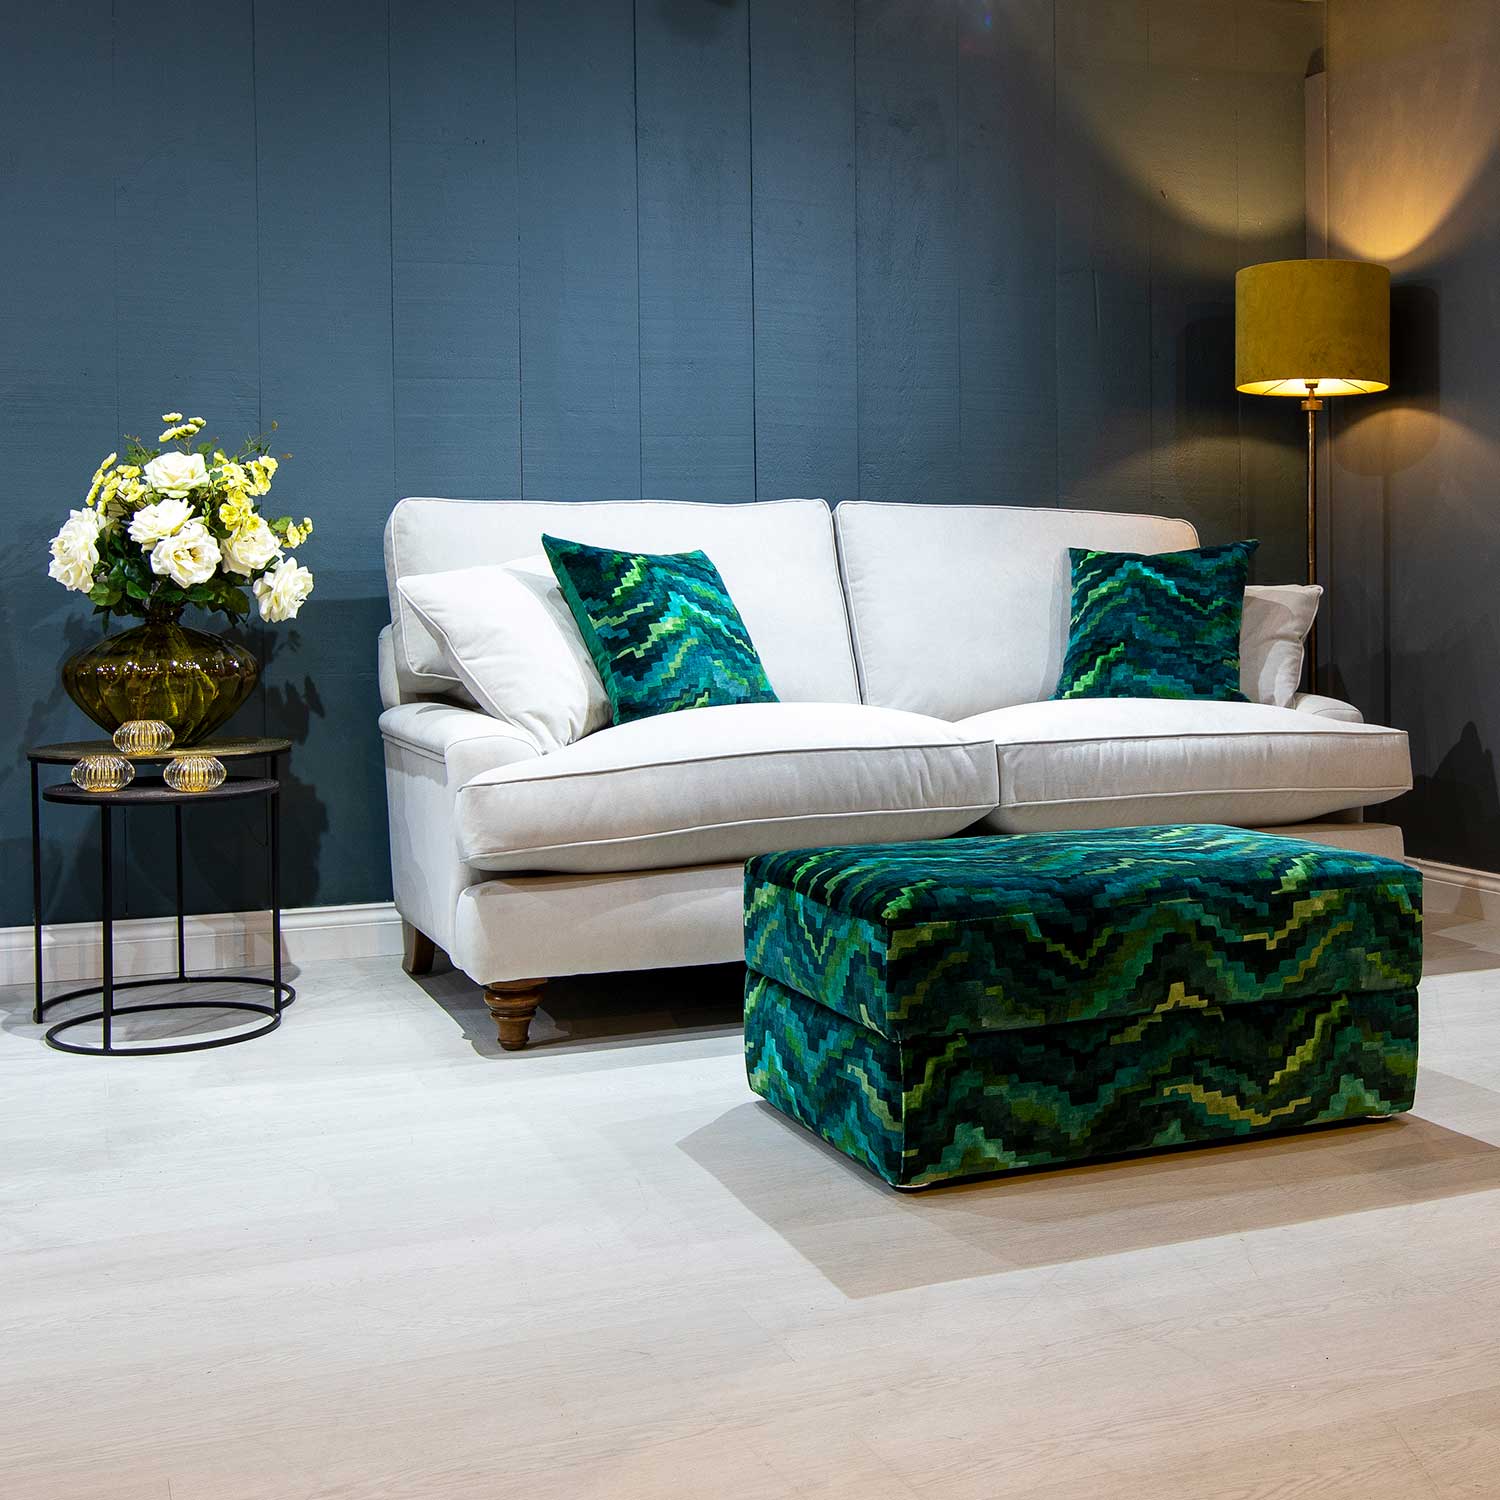 White Winchester 2 seater sofa with contrasting bespoke green cushions and Ottoman footstool